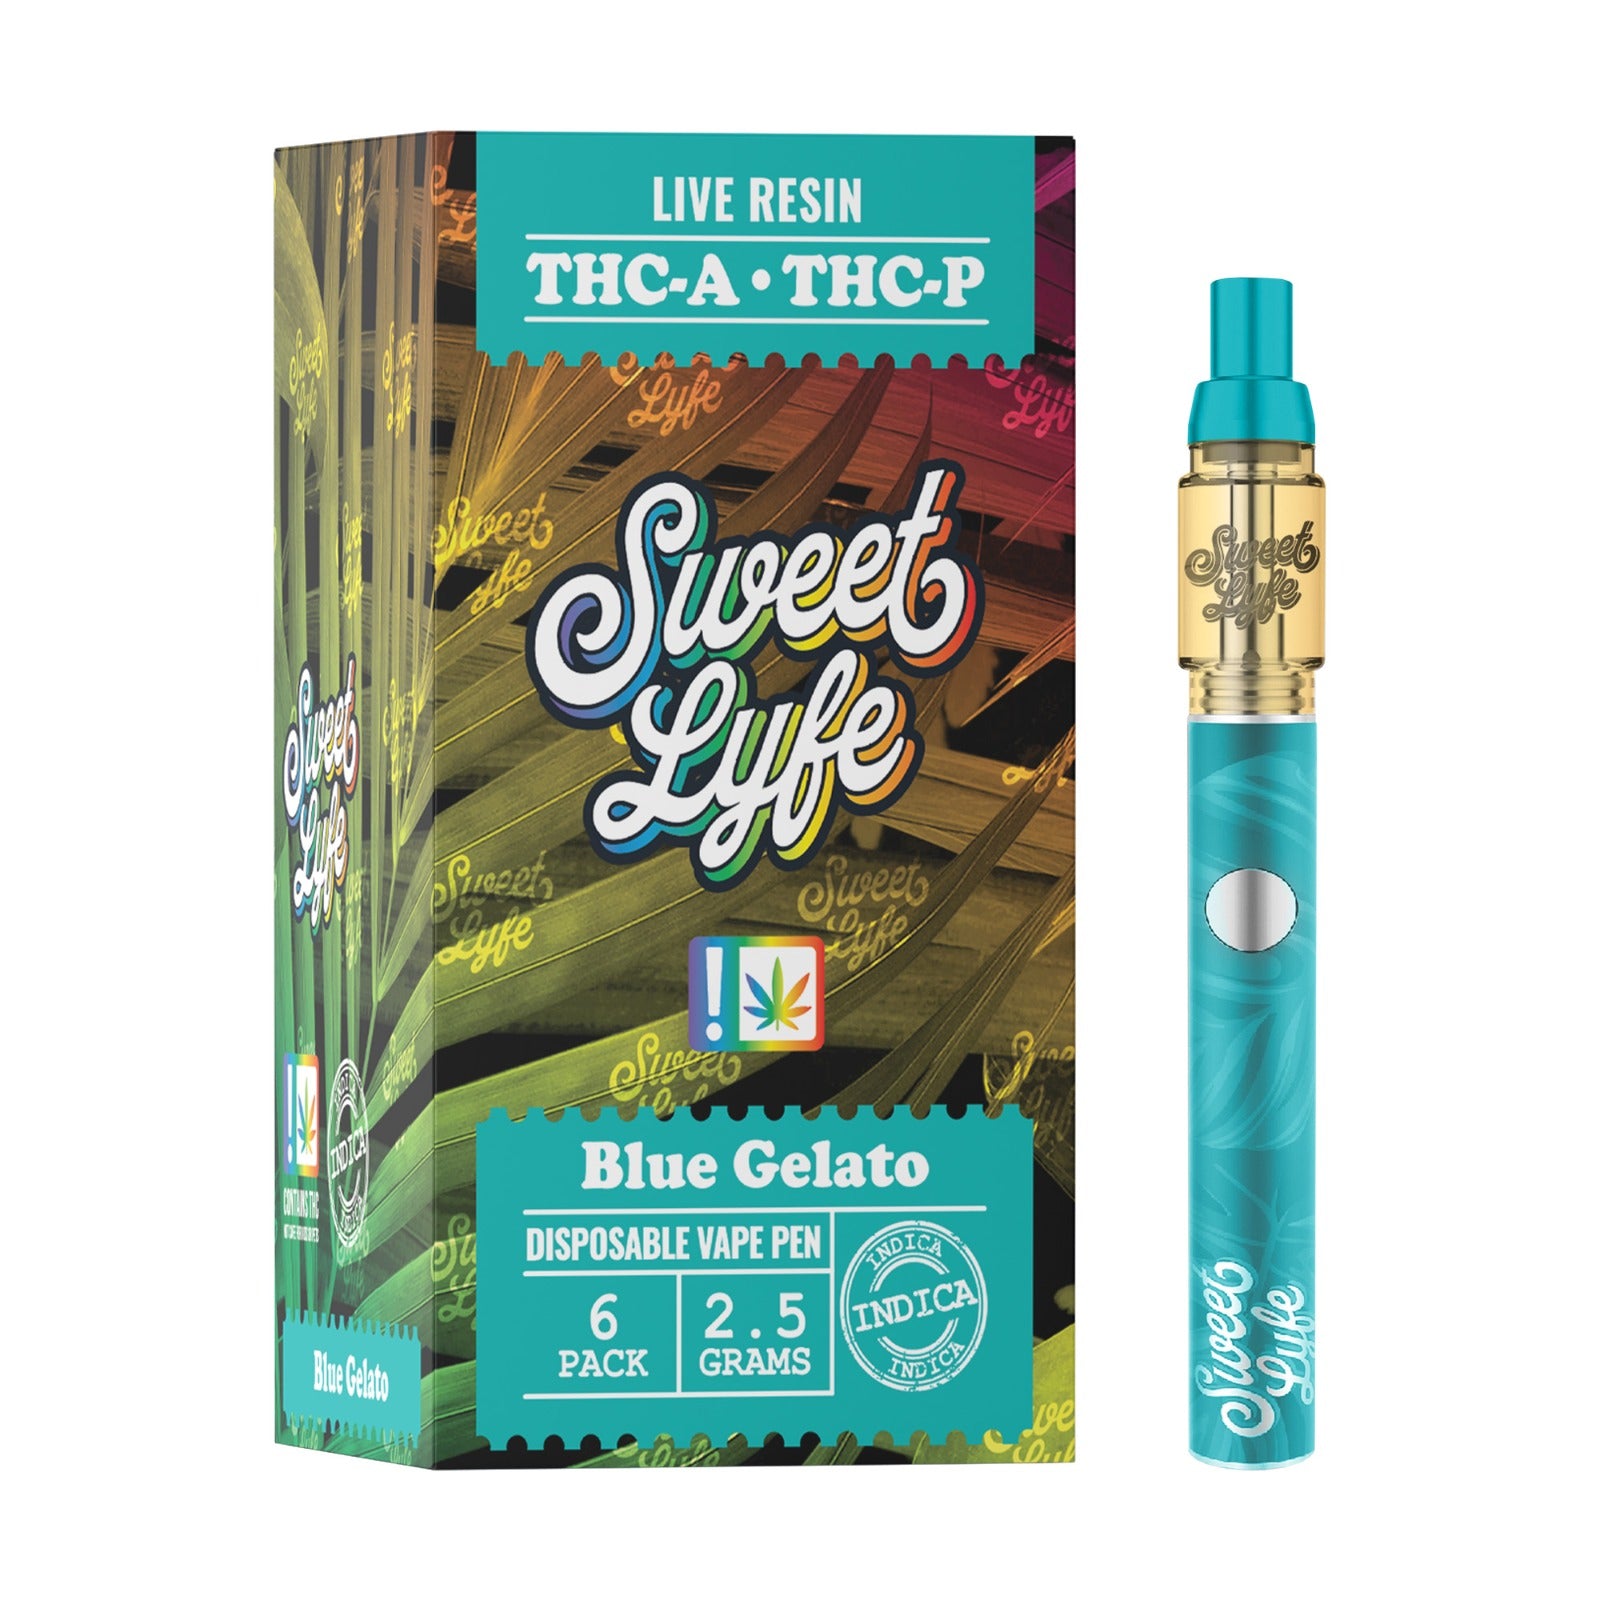 2.5ml Disposable Vape Pen Infused with Live Resin THCA & THCP - Blue Gelato - Indica